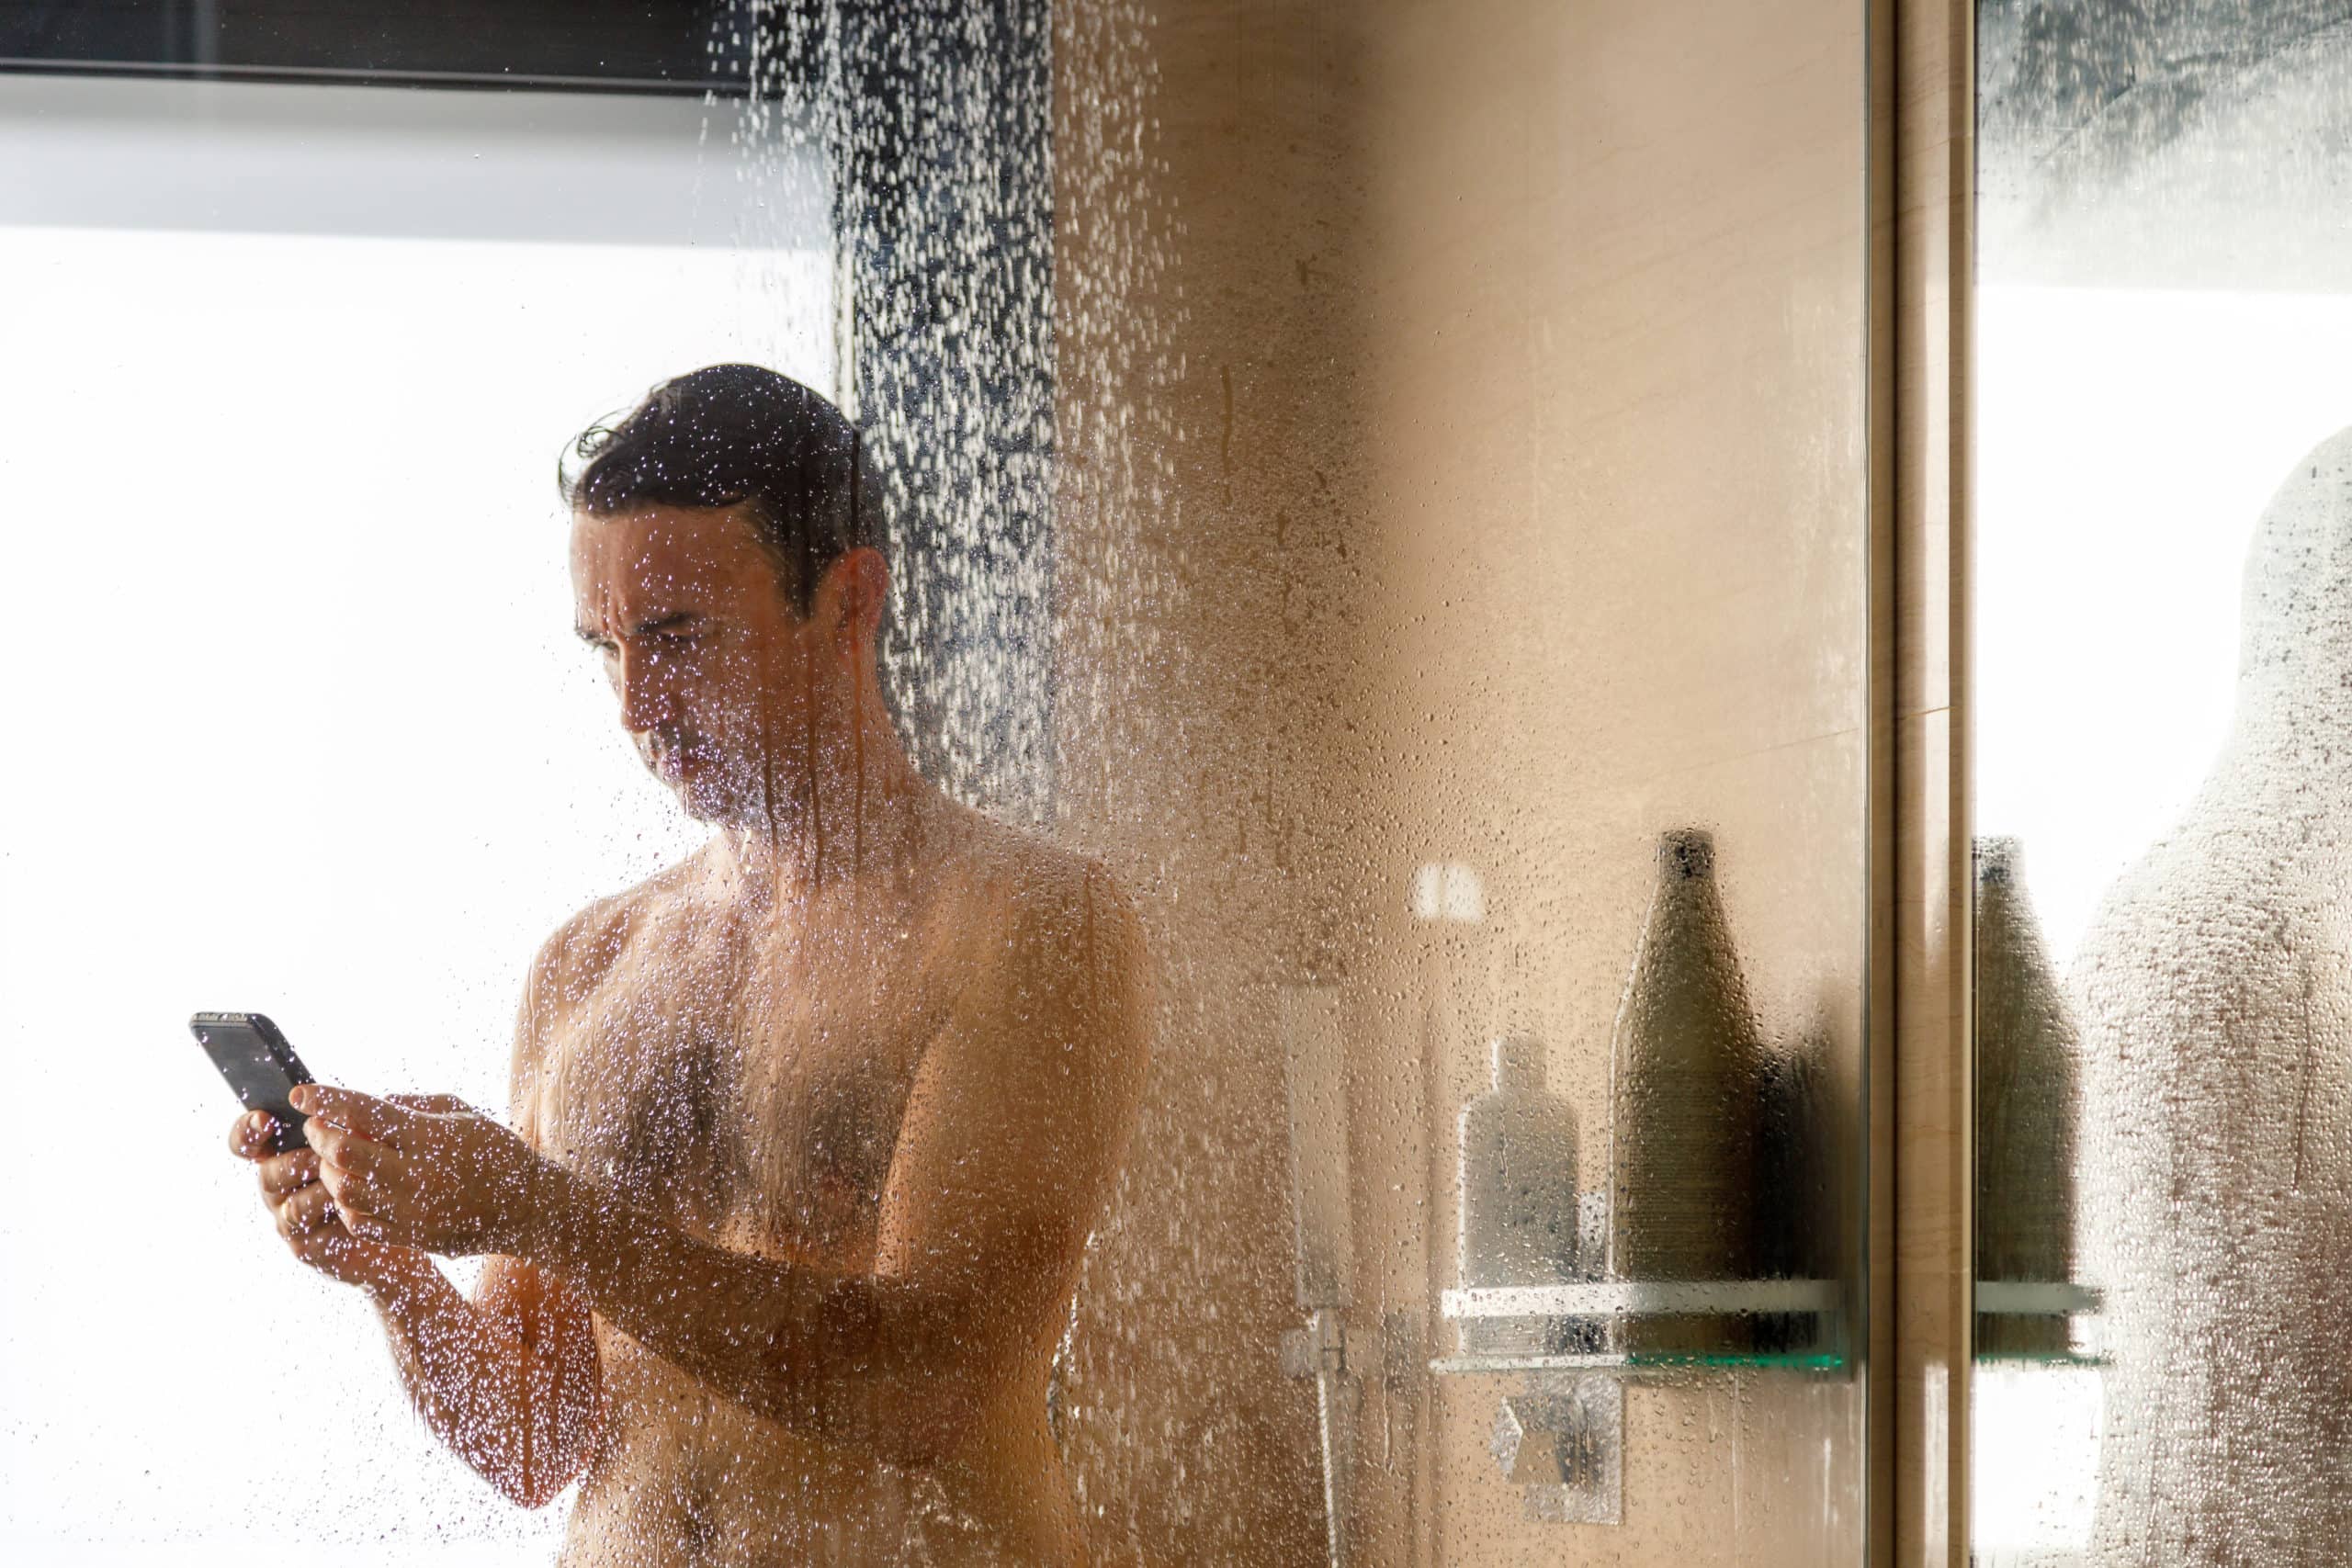 Naked young man showering while using a cell phone